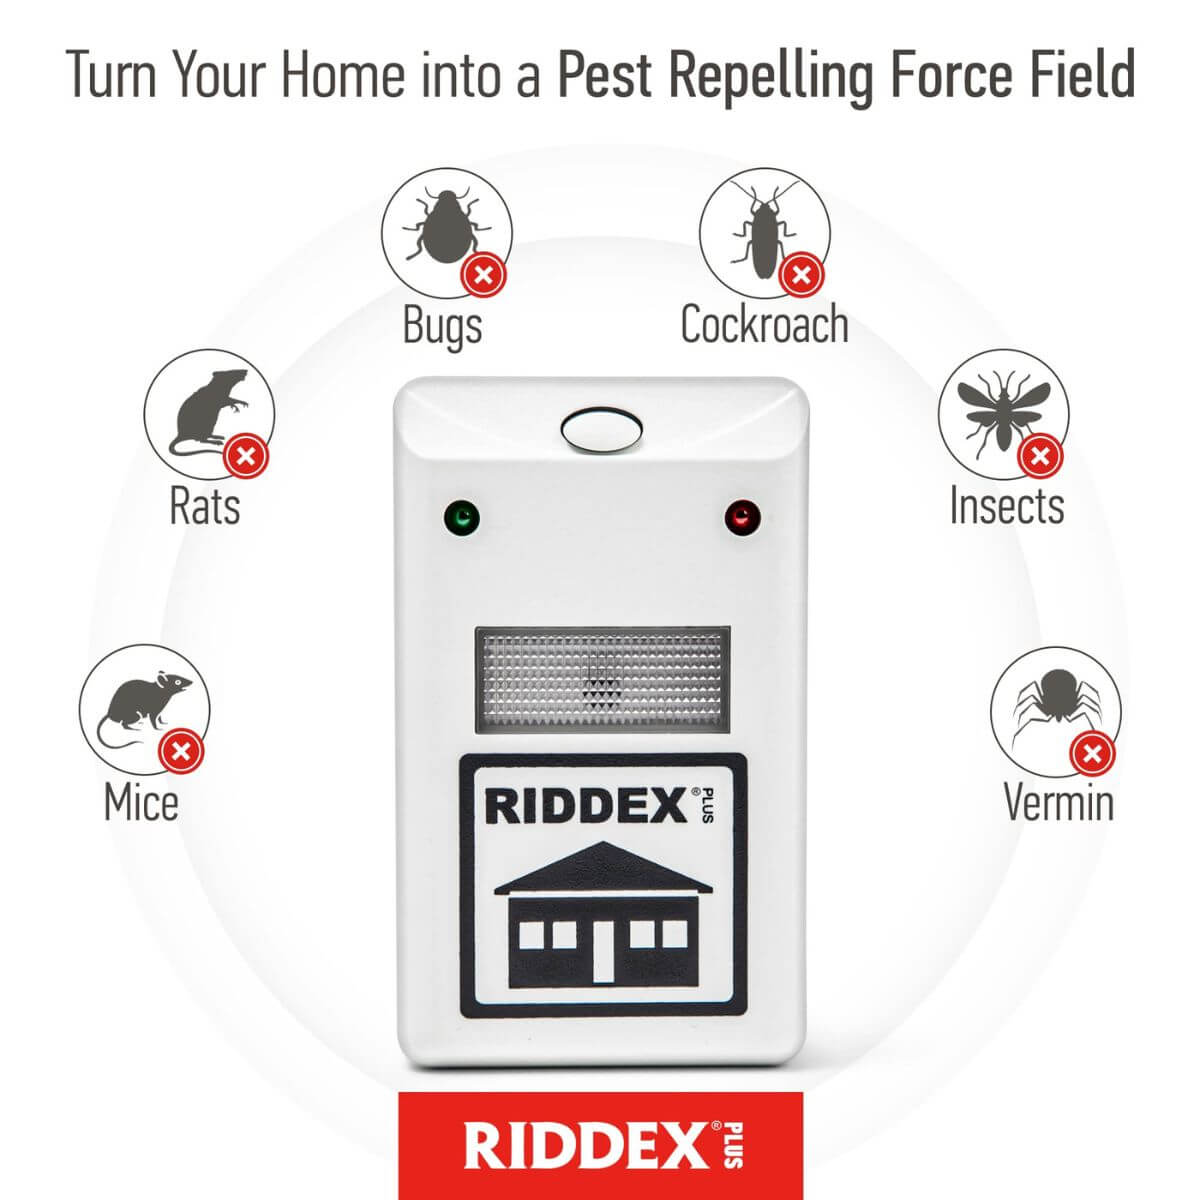 Riddex Plus Electromagnetic Pest Repeller: Turn your home into a pest-repelling force field